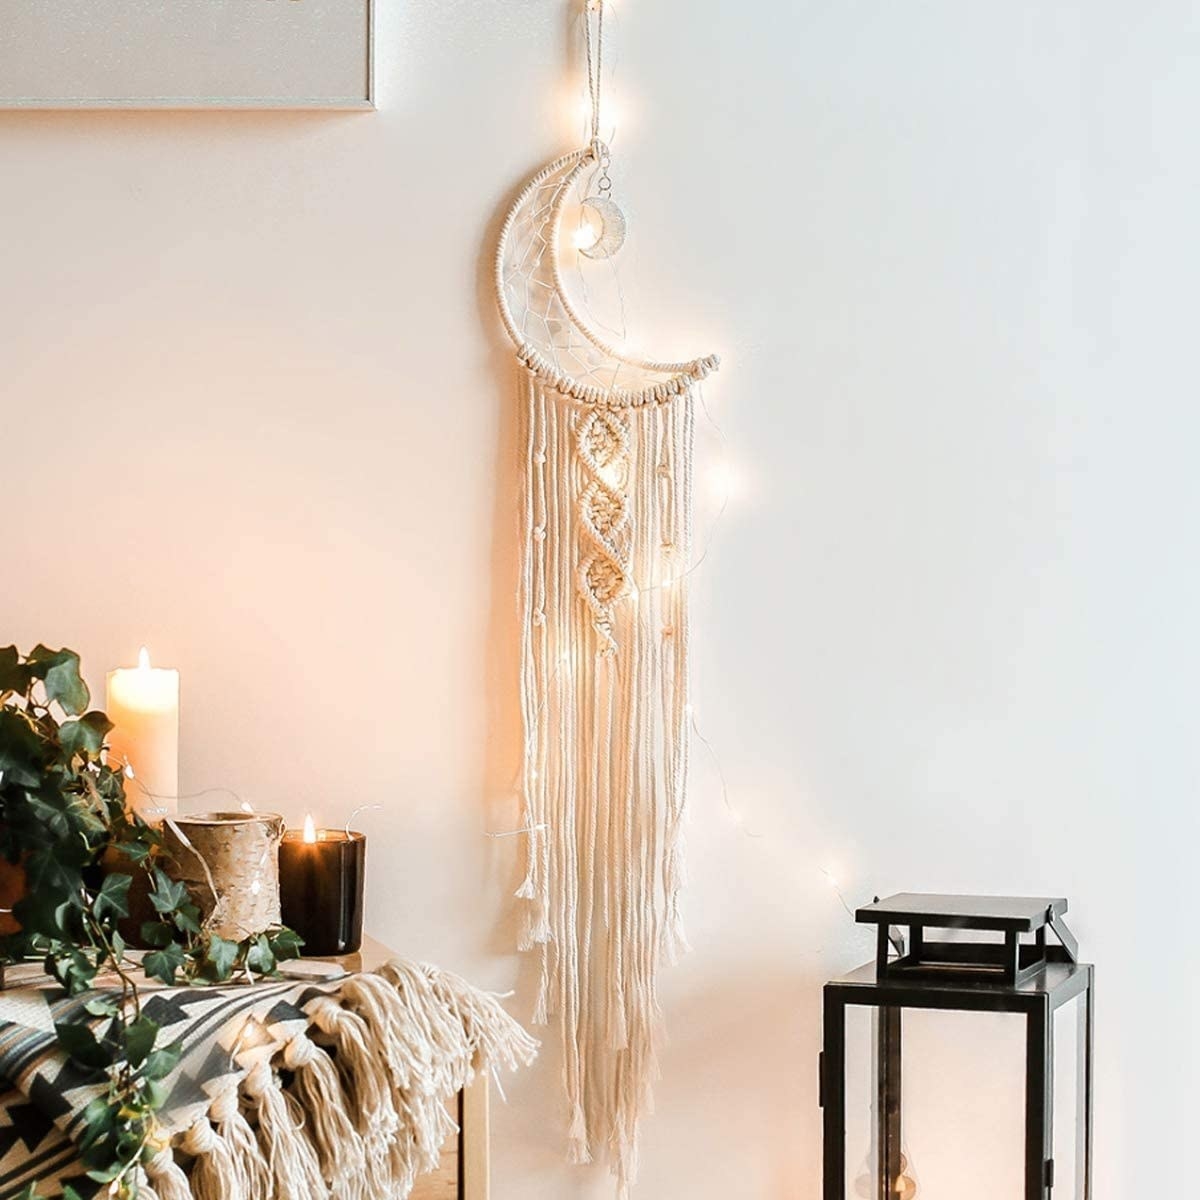 The macrame hanging on a wall